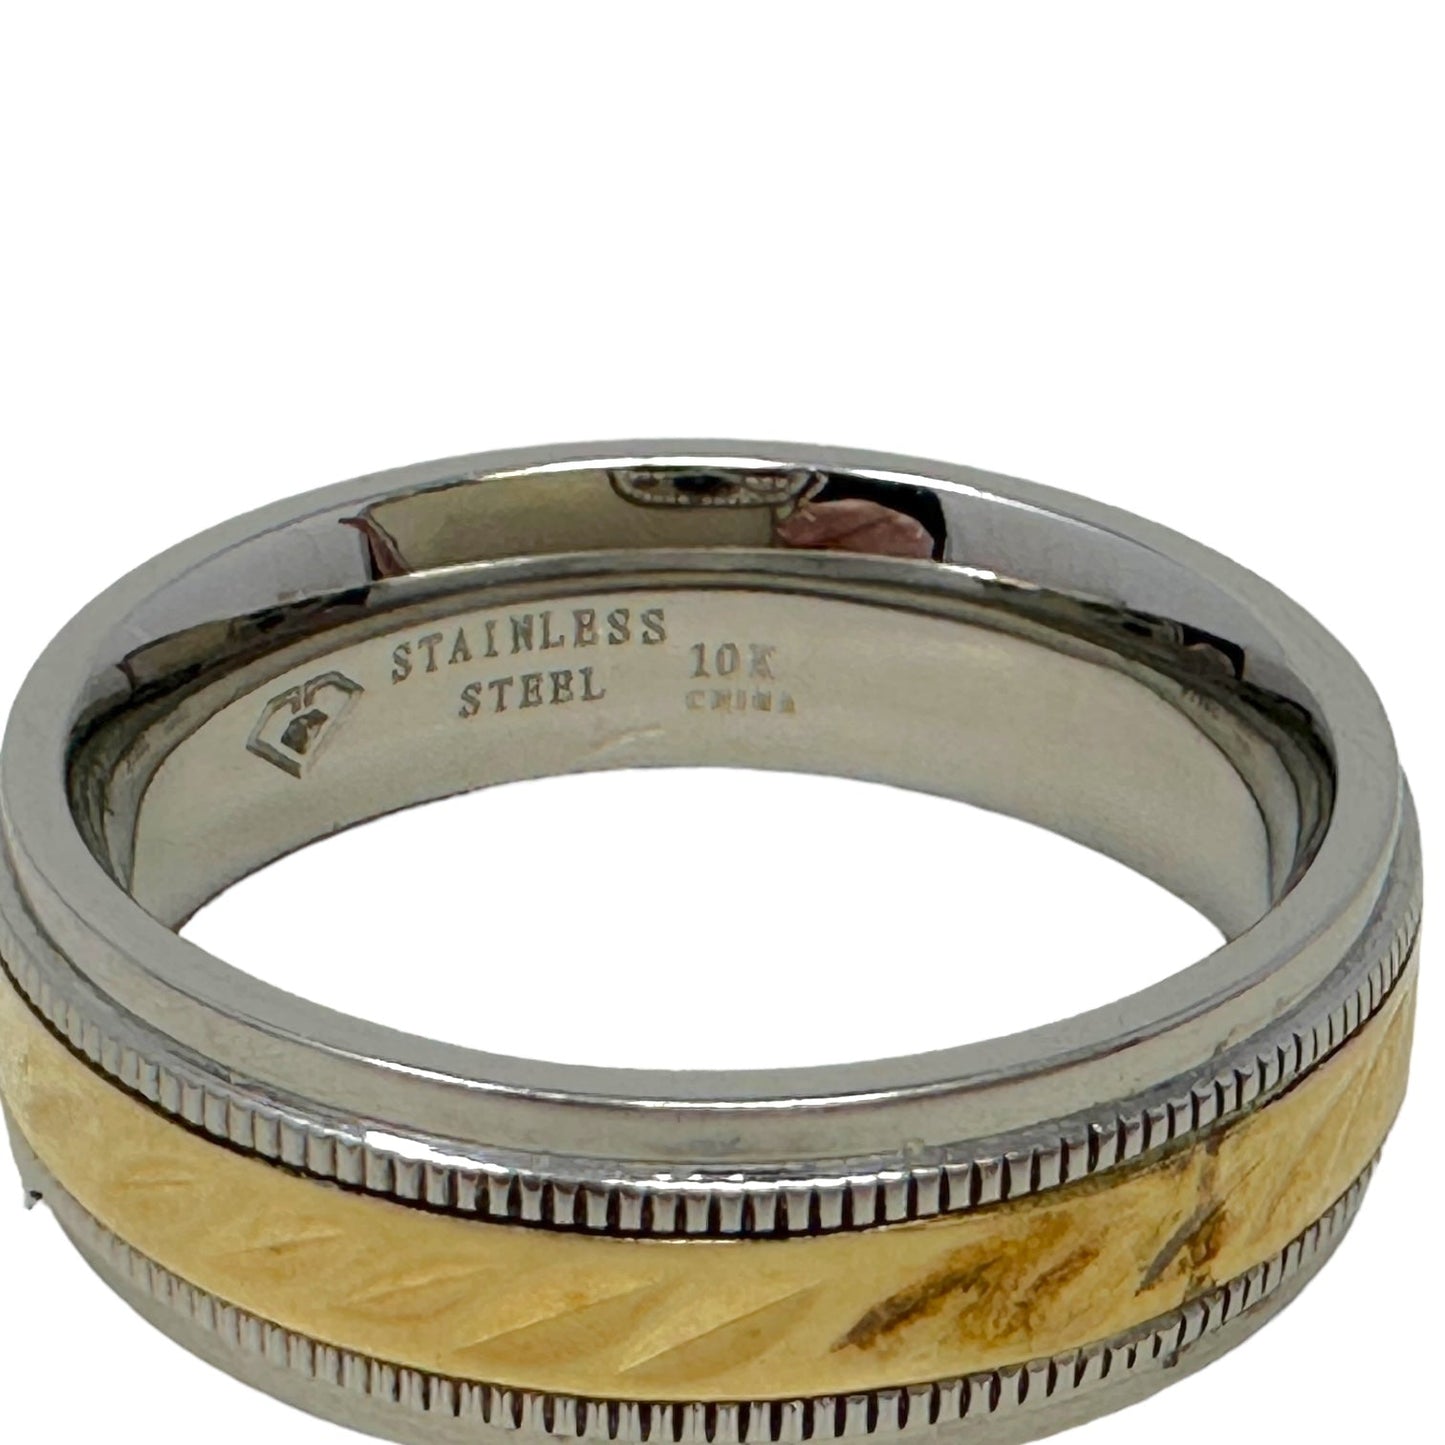 Stainless Steel& 10k Gold Band Ring Unbranded, Size 11